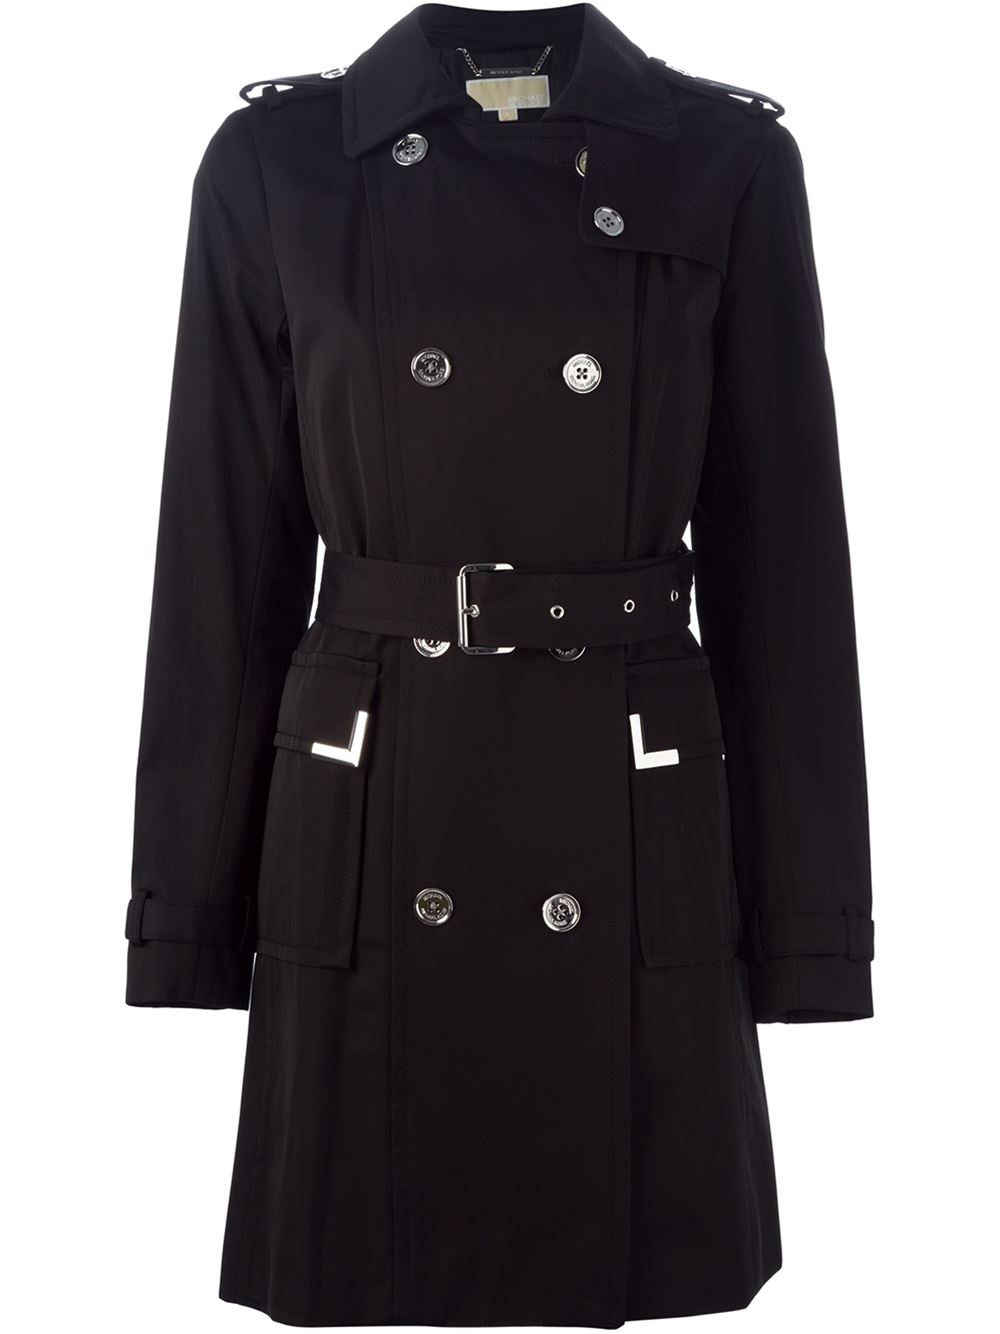 Lyst - Michael Michael Kors Belted Trench Coat in Black